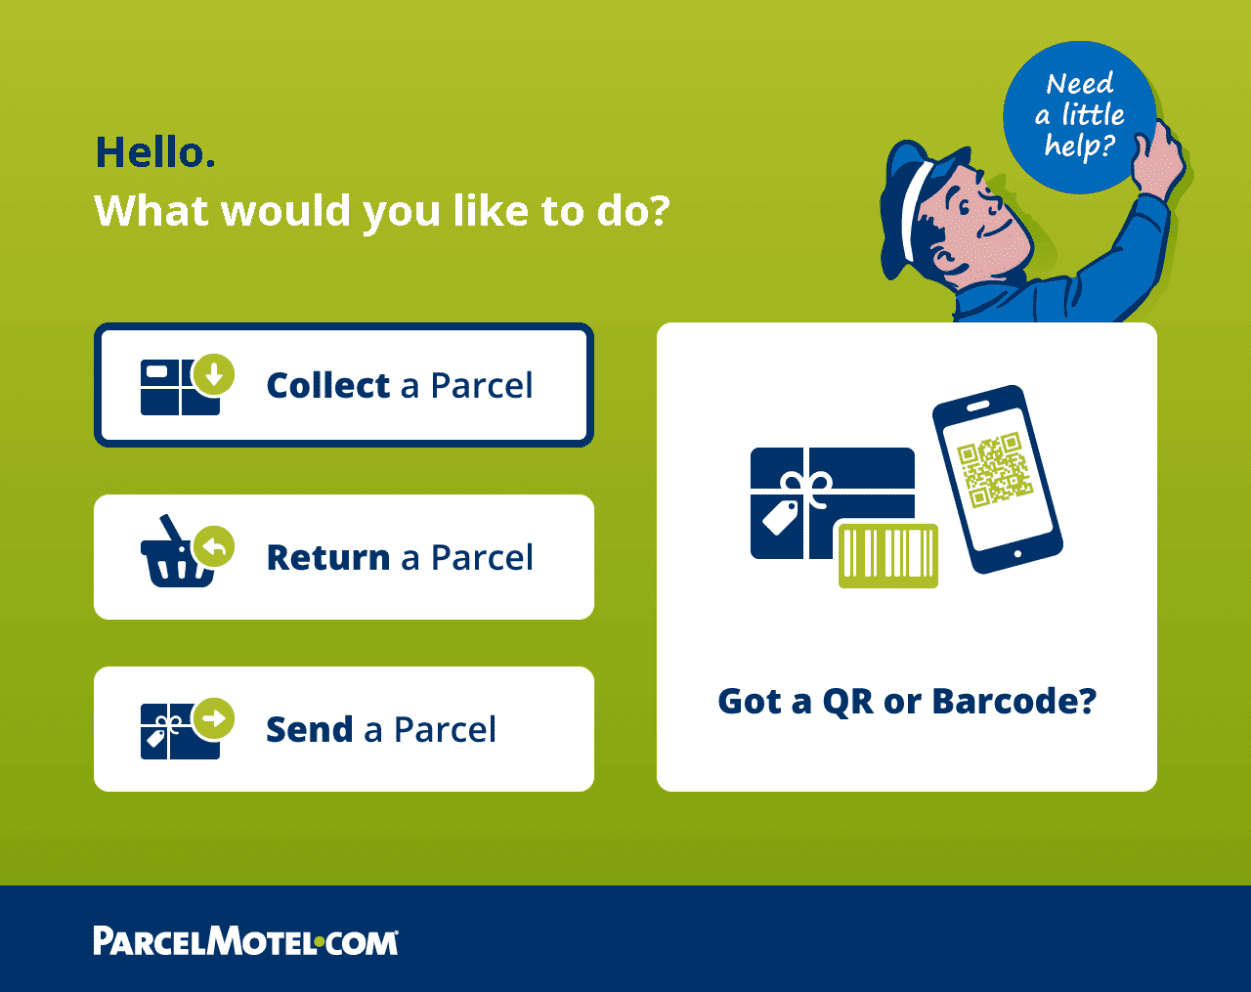 A Parcel Motel screen showing how easy it is to Collect a parcel, return a parcel, send a parcel or use a QR barcode. You just clink the link you need.